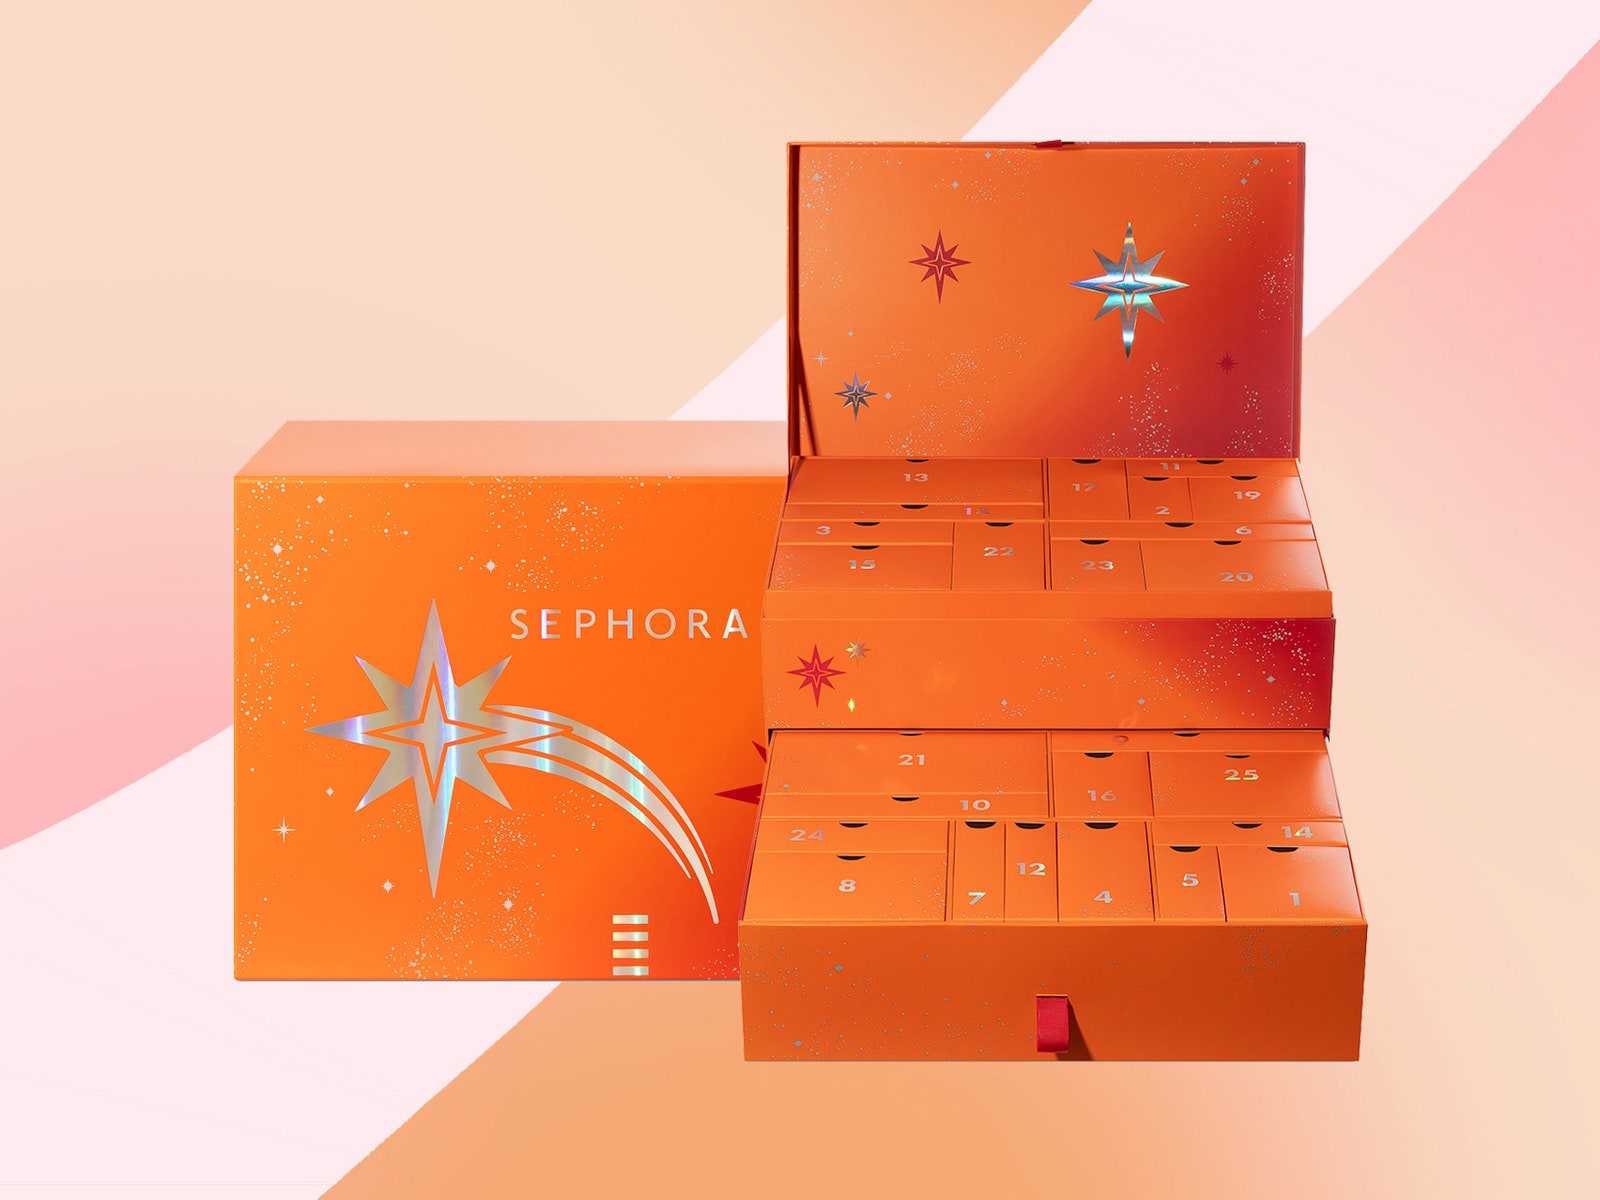 It's official: the sell-out Sephora Advent Calendar is back and you can already sign up for the waitlist &#8211; run, don't walk